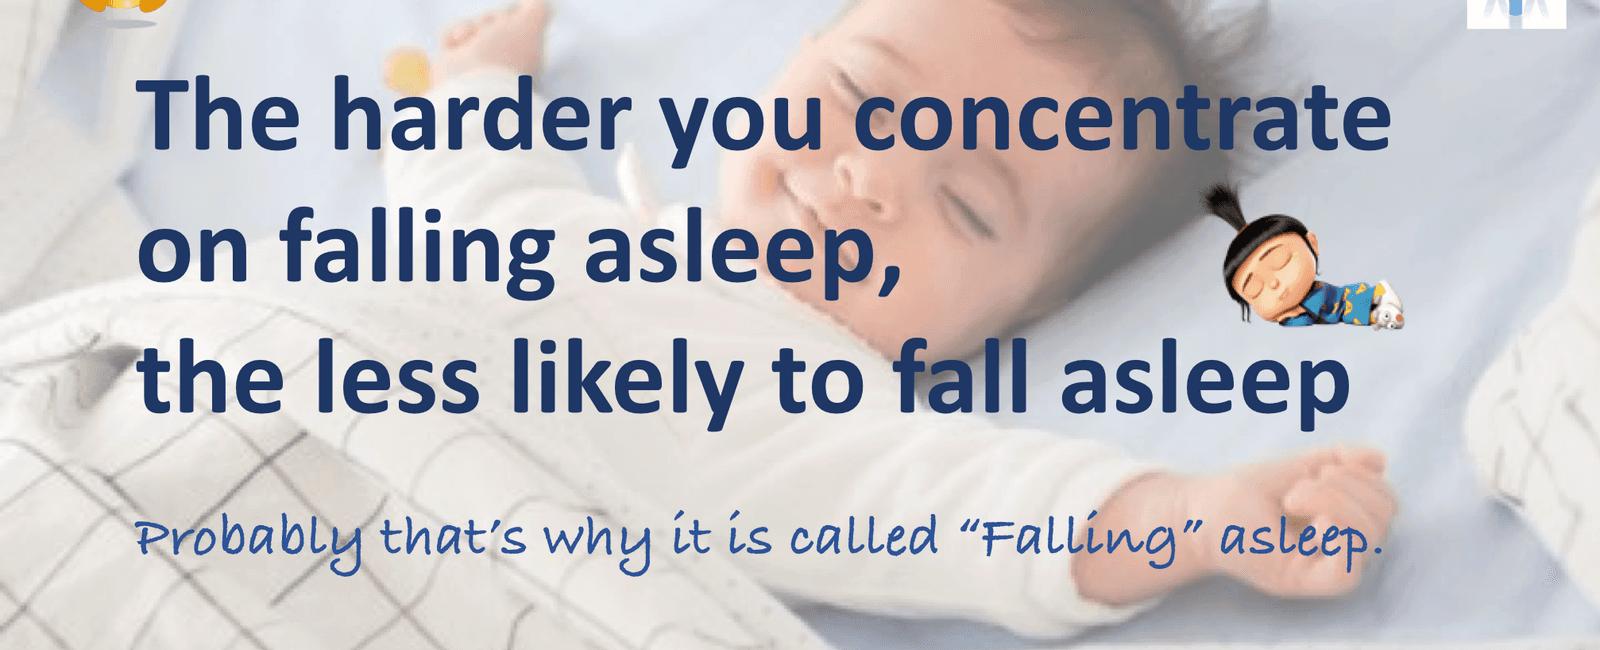 If you re able to fall asleep within 5 minutes it likely means you are sleep deprived for those with healthy sleep habits it should take 10 15 minutes